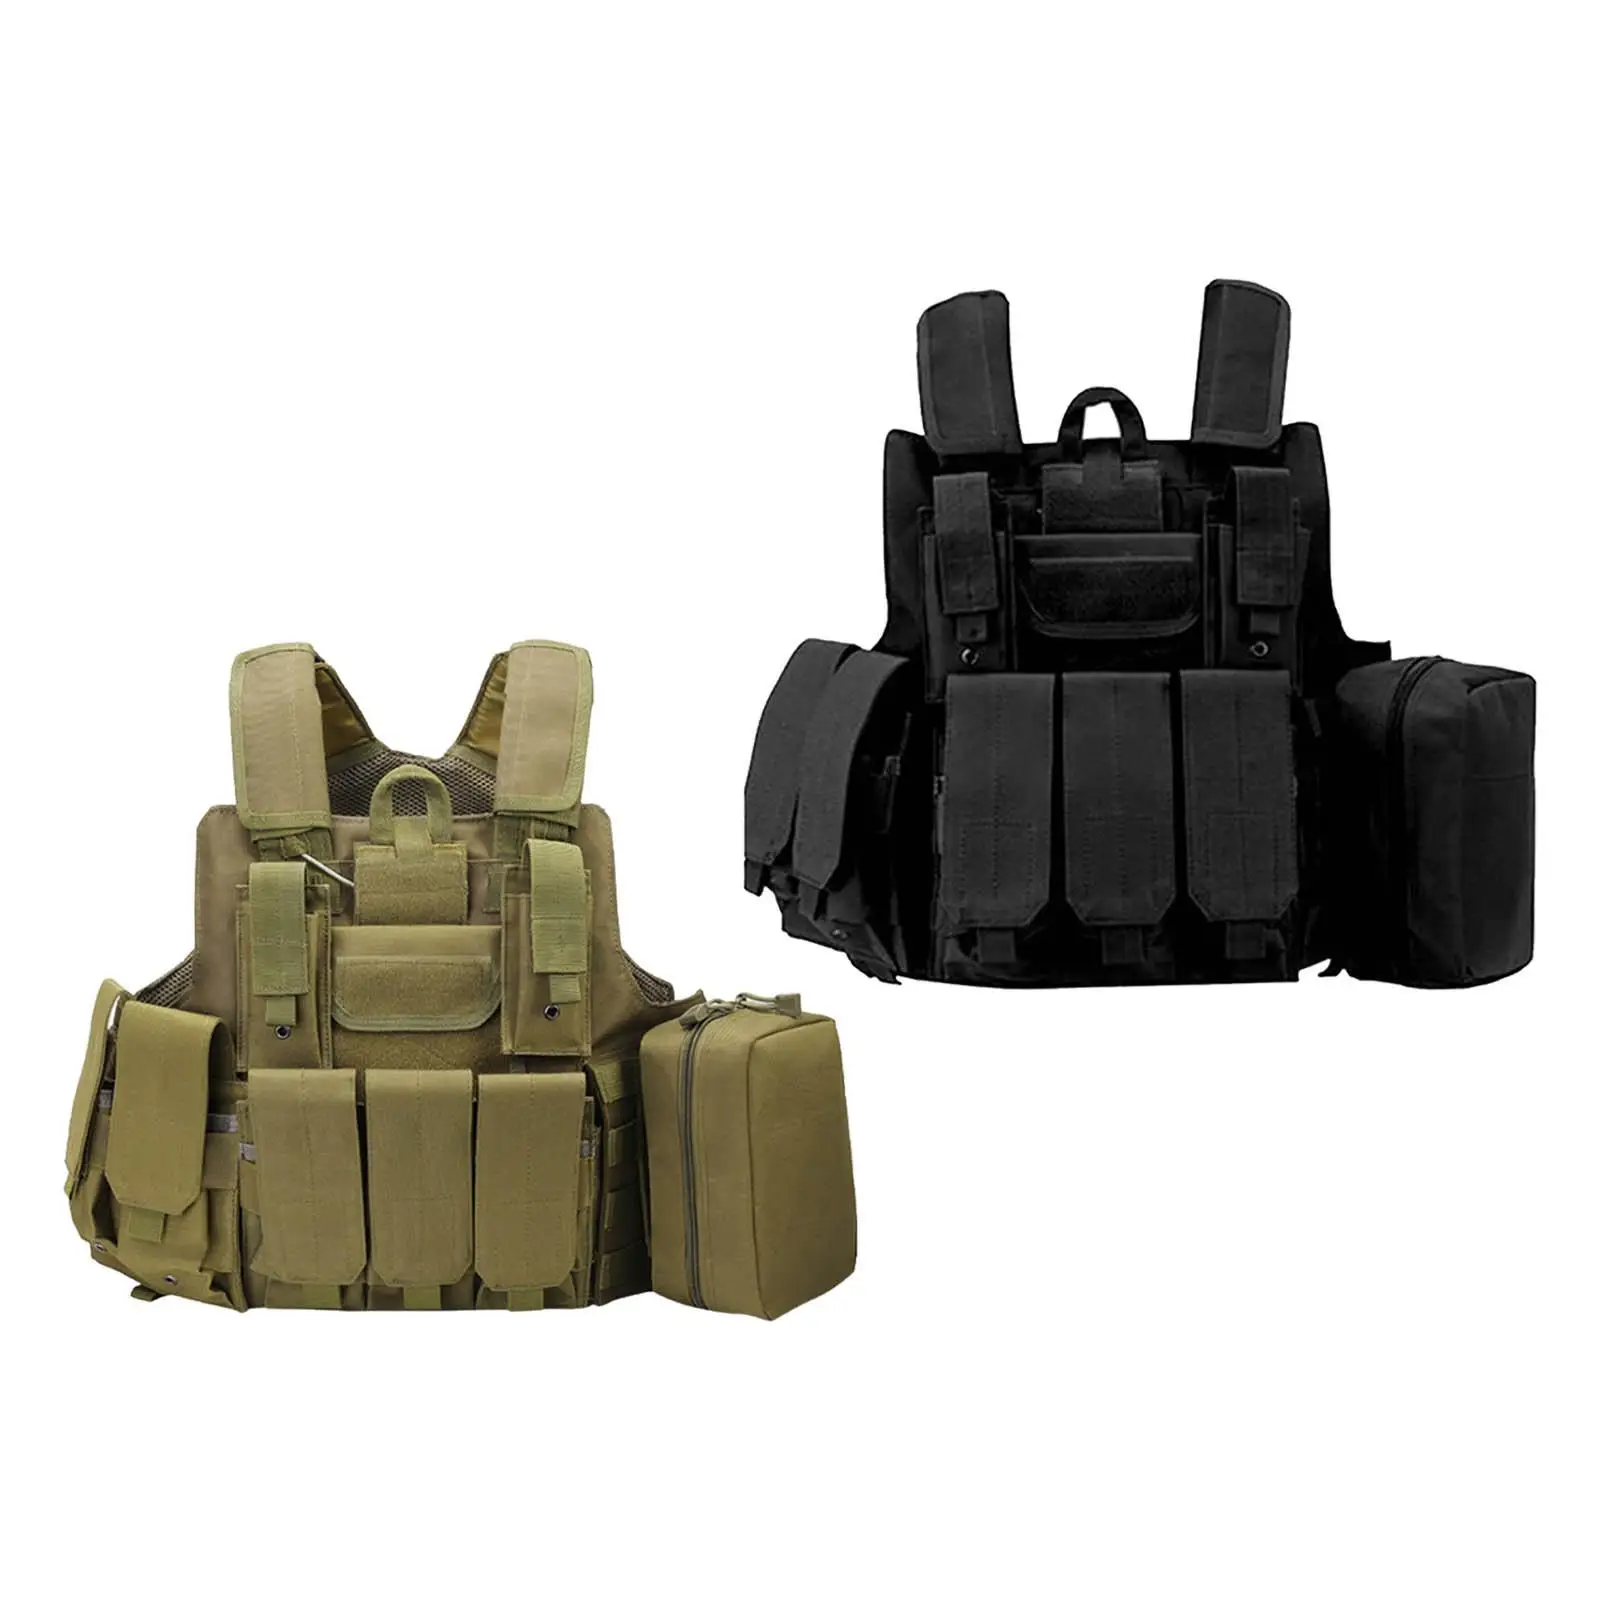 Amphibious Tactical Vest Hunting CS Combat Shooting Outdoor Men`s Adjustable Vest Plate Carriers Army Military Training Gear